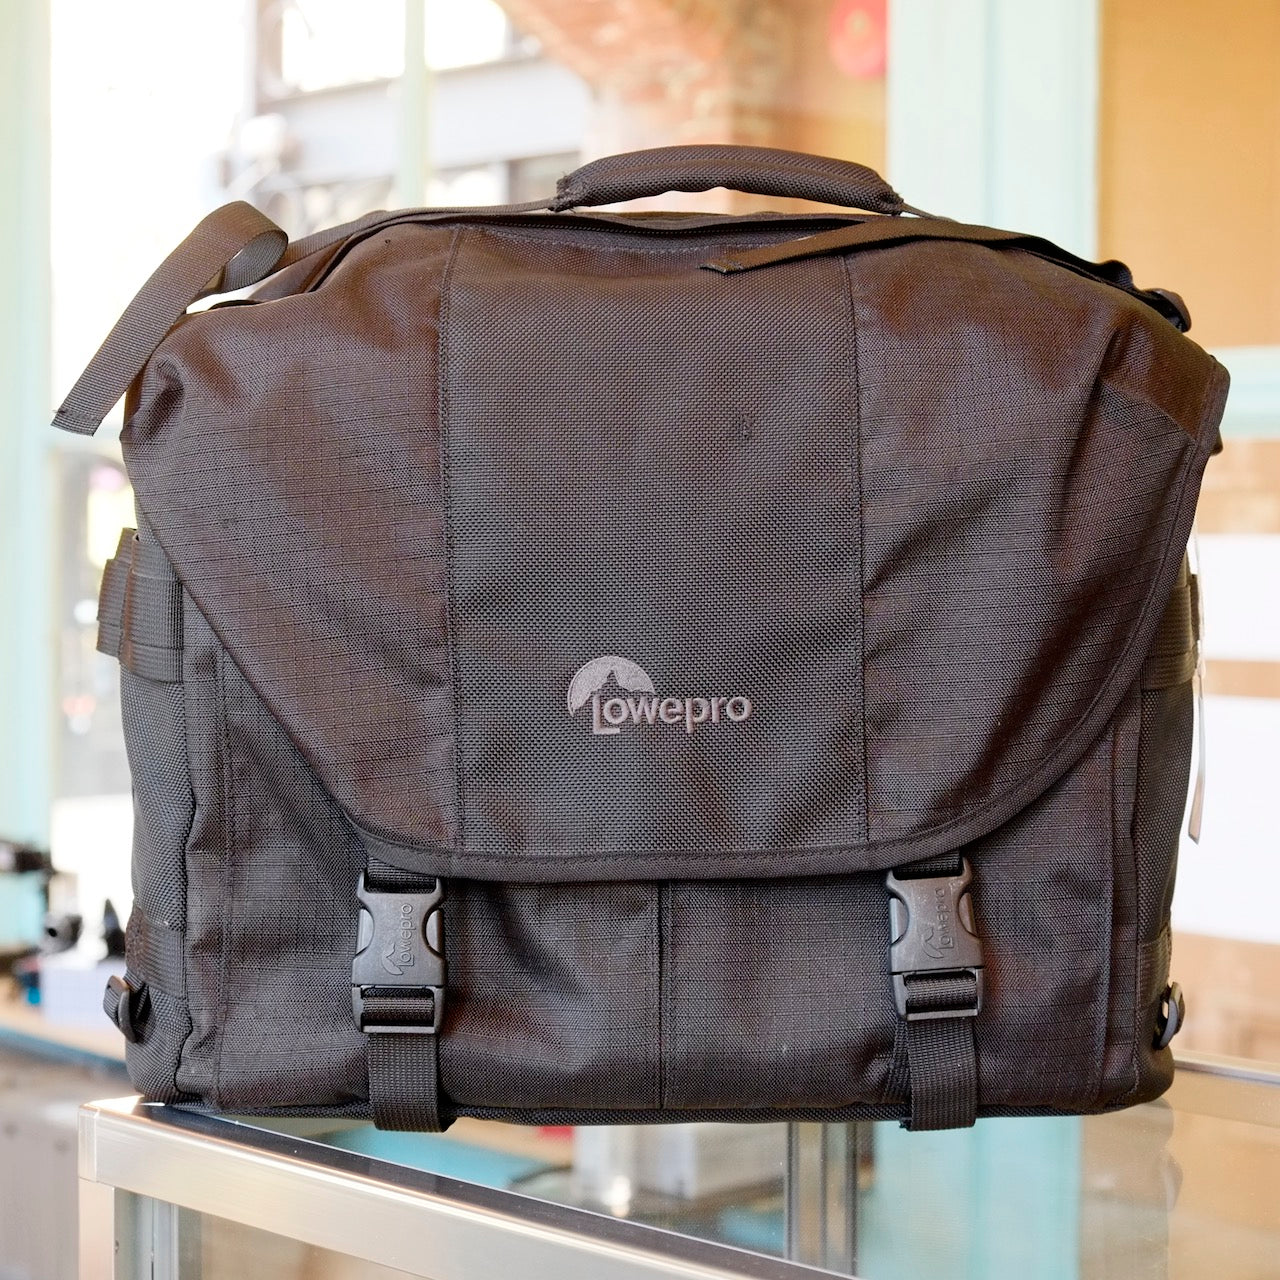 Lowepro Stealth Reporter 600AW